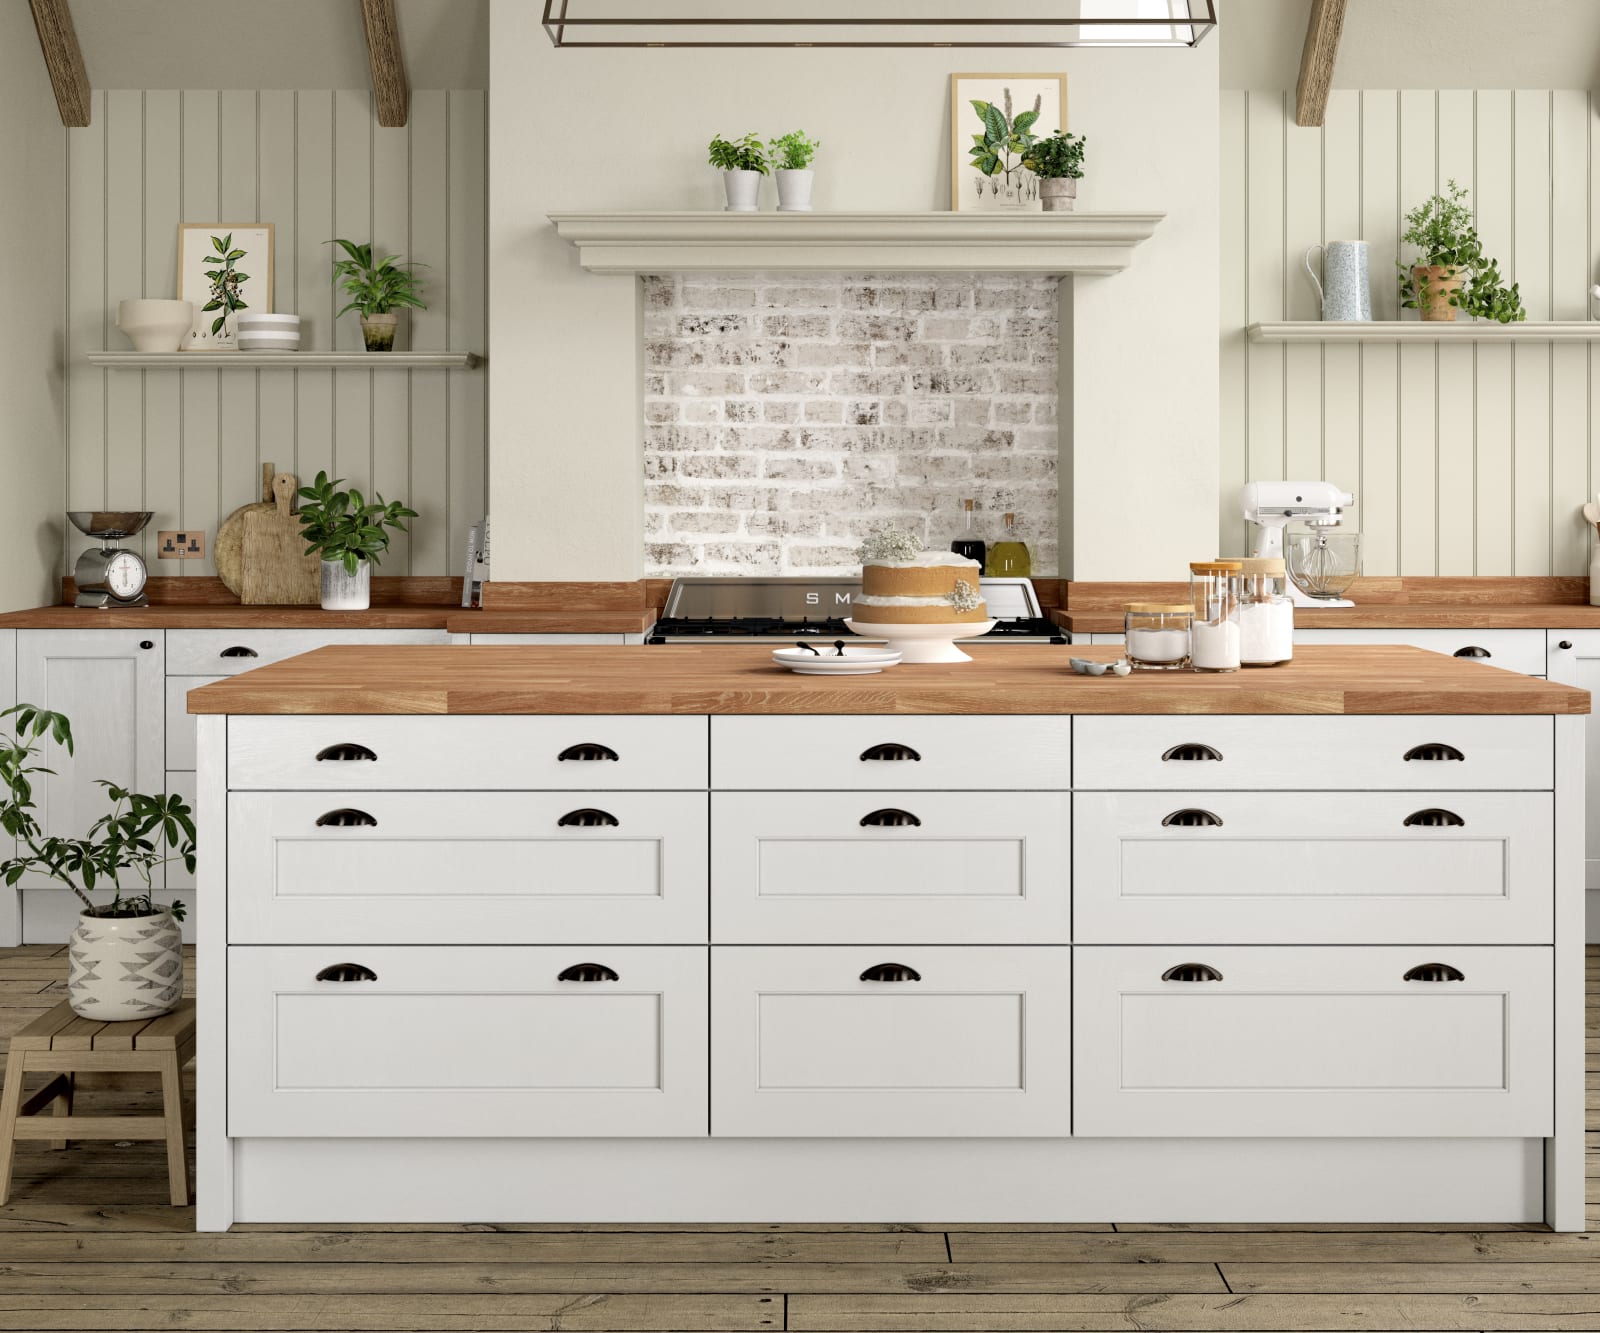 Ludlow kitchen. Our latest Shaker door, with a modern country-style. Available in all 20 Magnet Create colours.